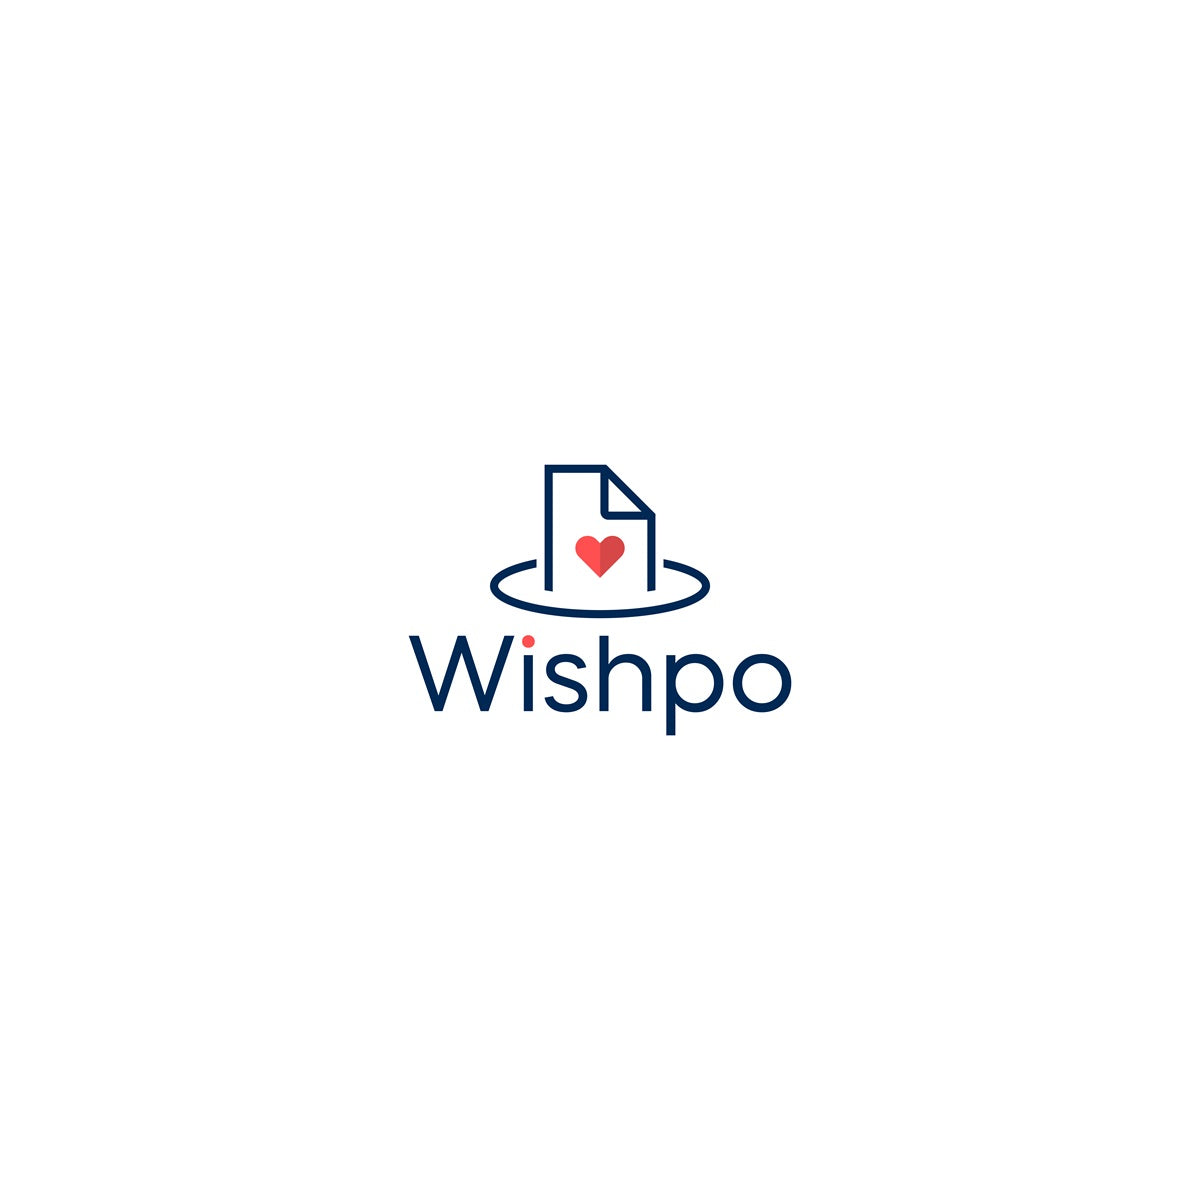 Hire Shopify Experts to integrate Wishpo app into a Shopify store